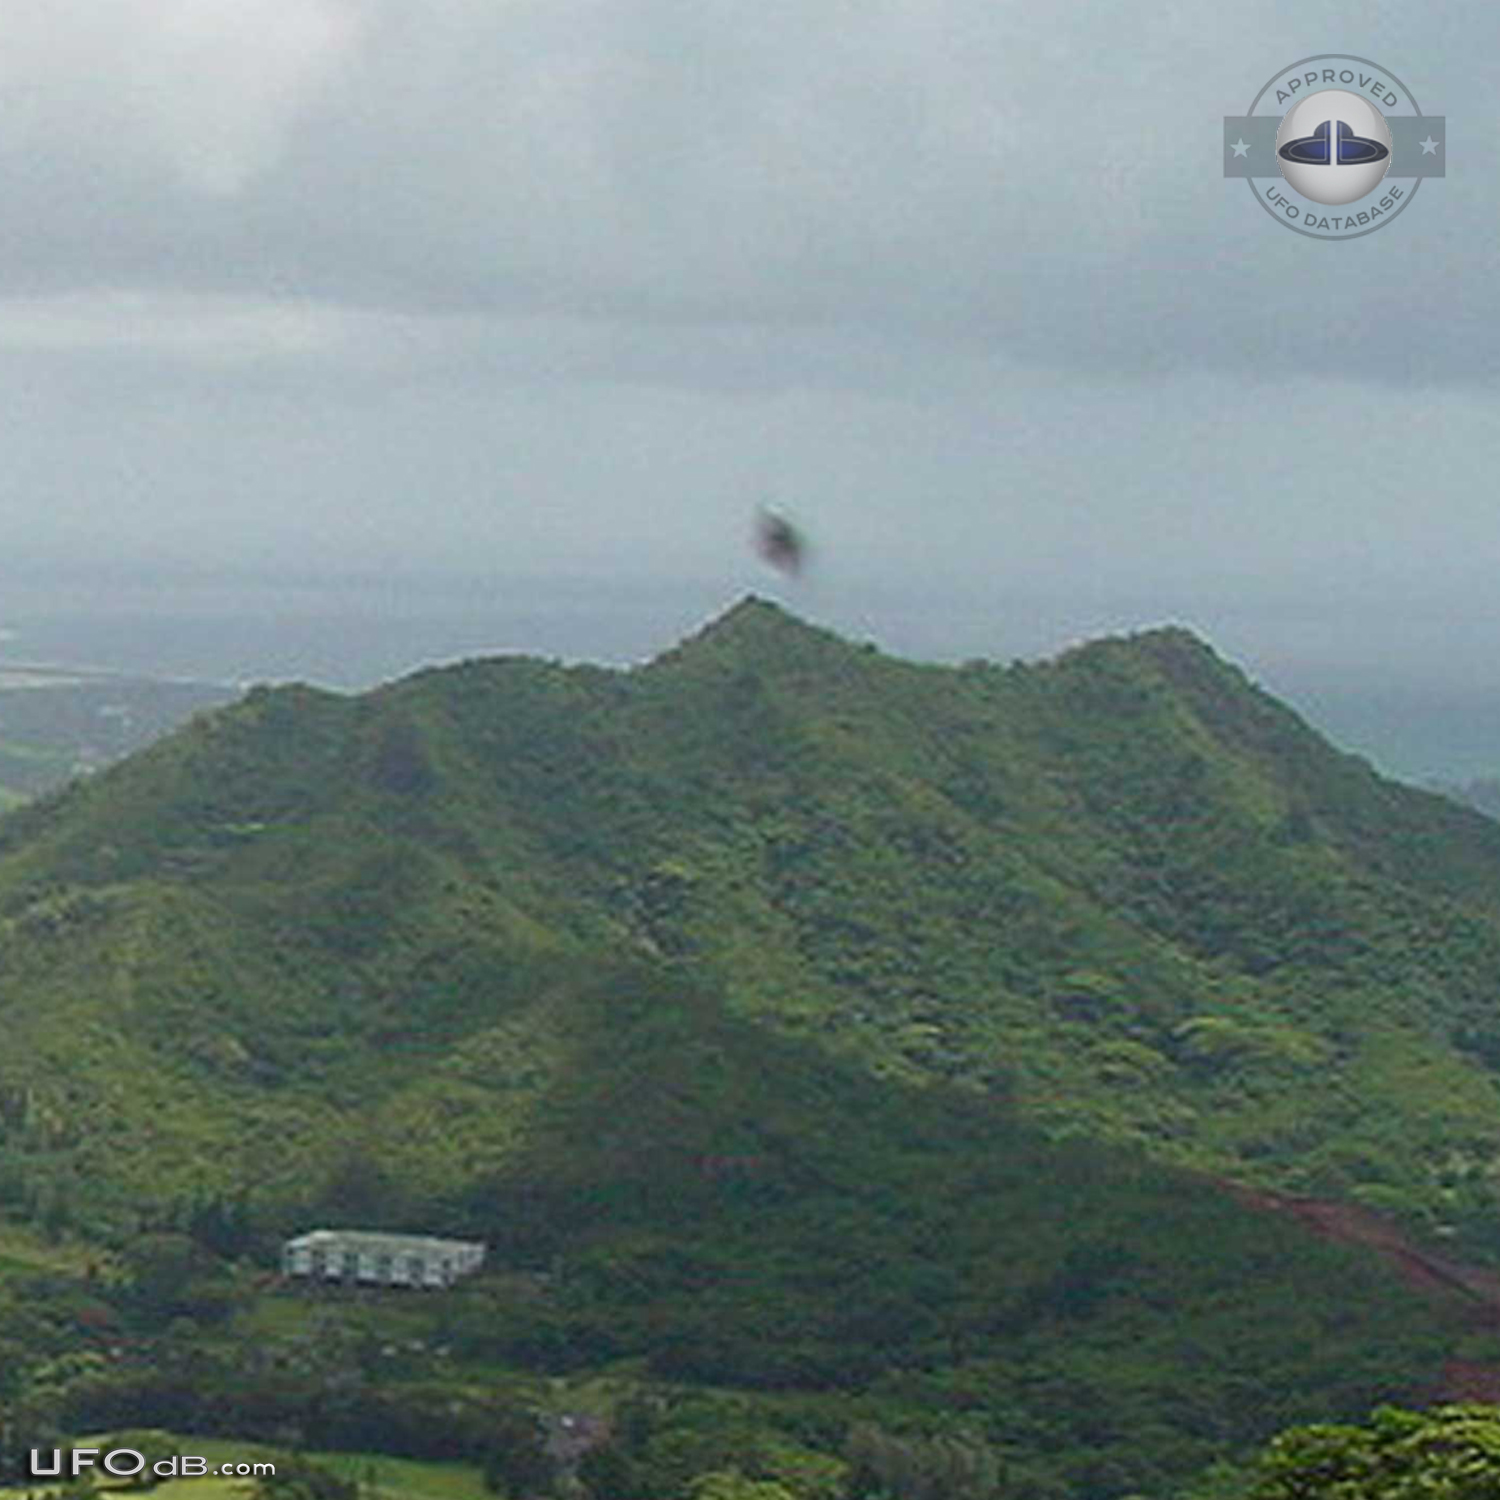 UFO caught on picture over mountain in Oahu, Hawaii in June 2004 UFO Picture #430-2